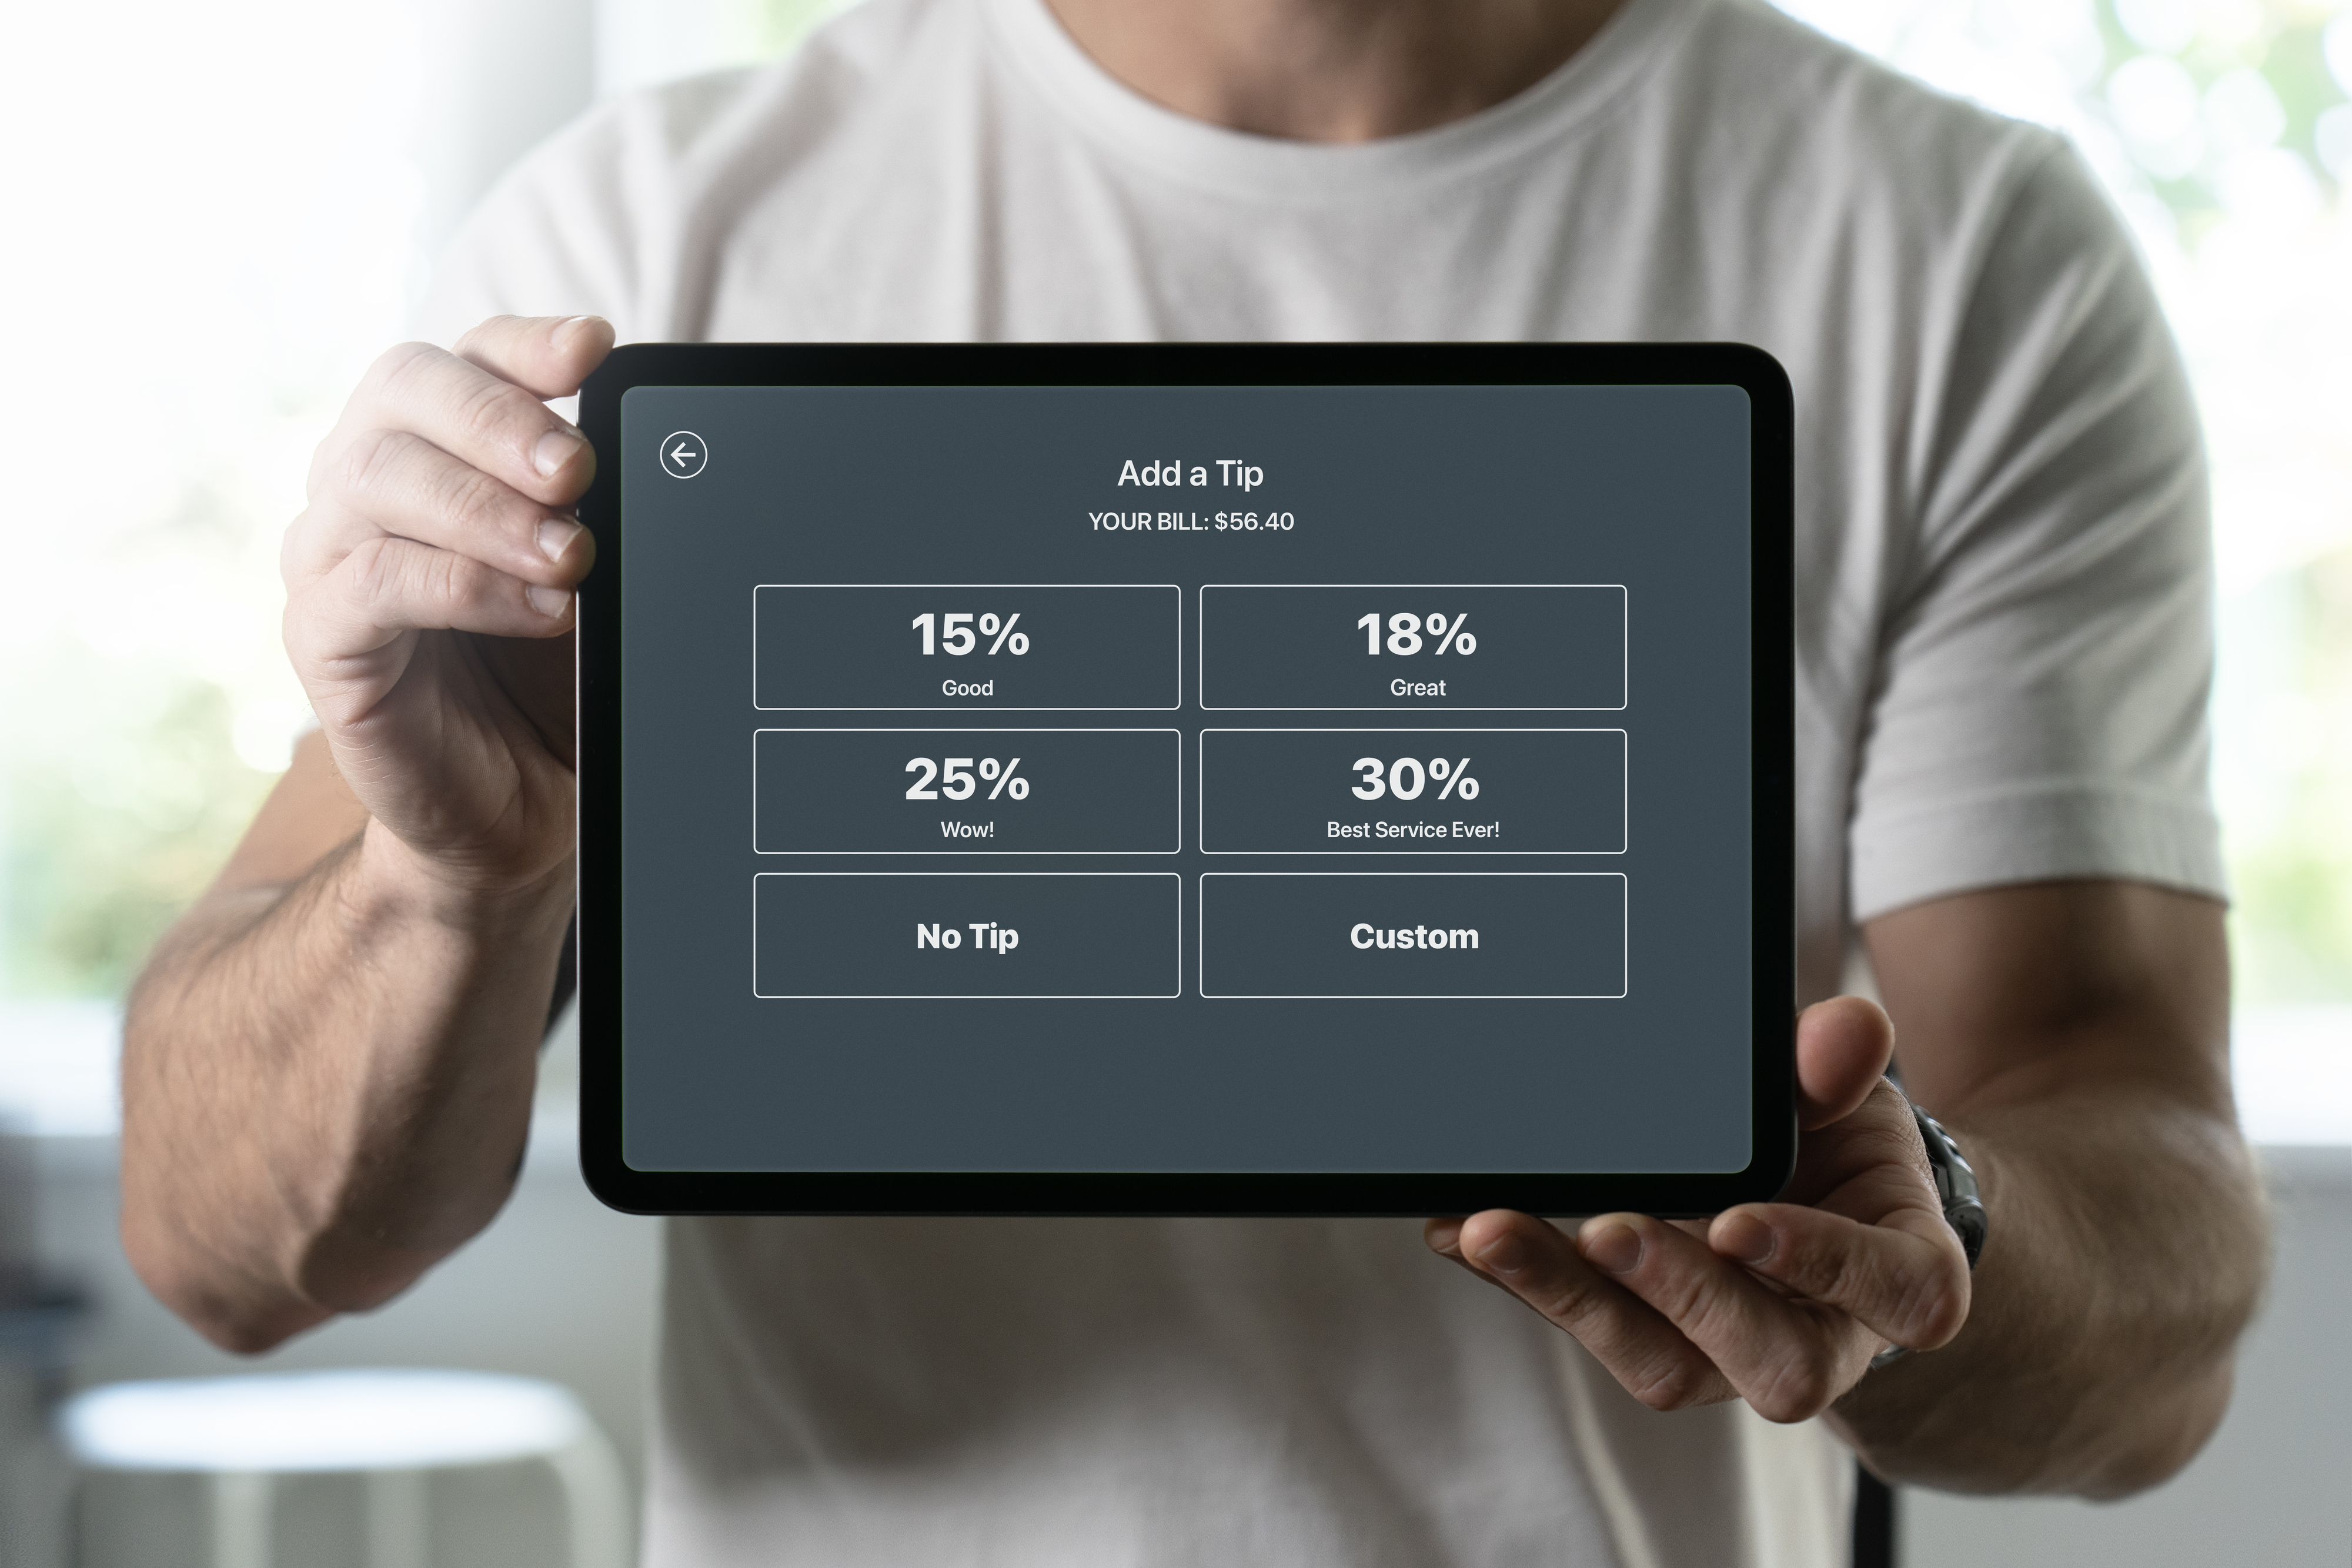 A person holding a tablet with a tipping option screen, including choices of 15%, 18%, 25%, 30%, No Tip, and Custom